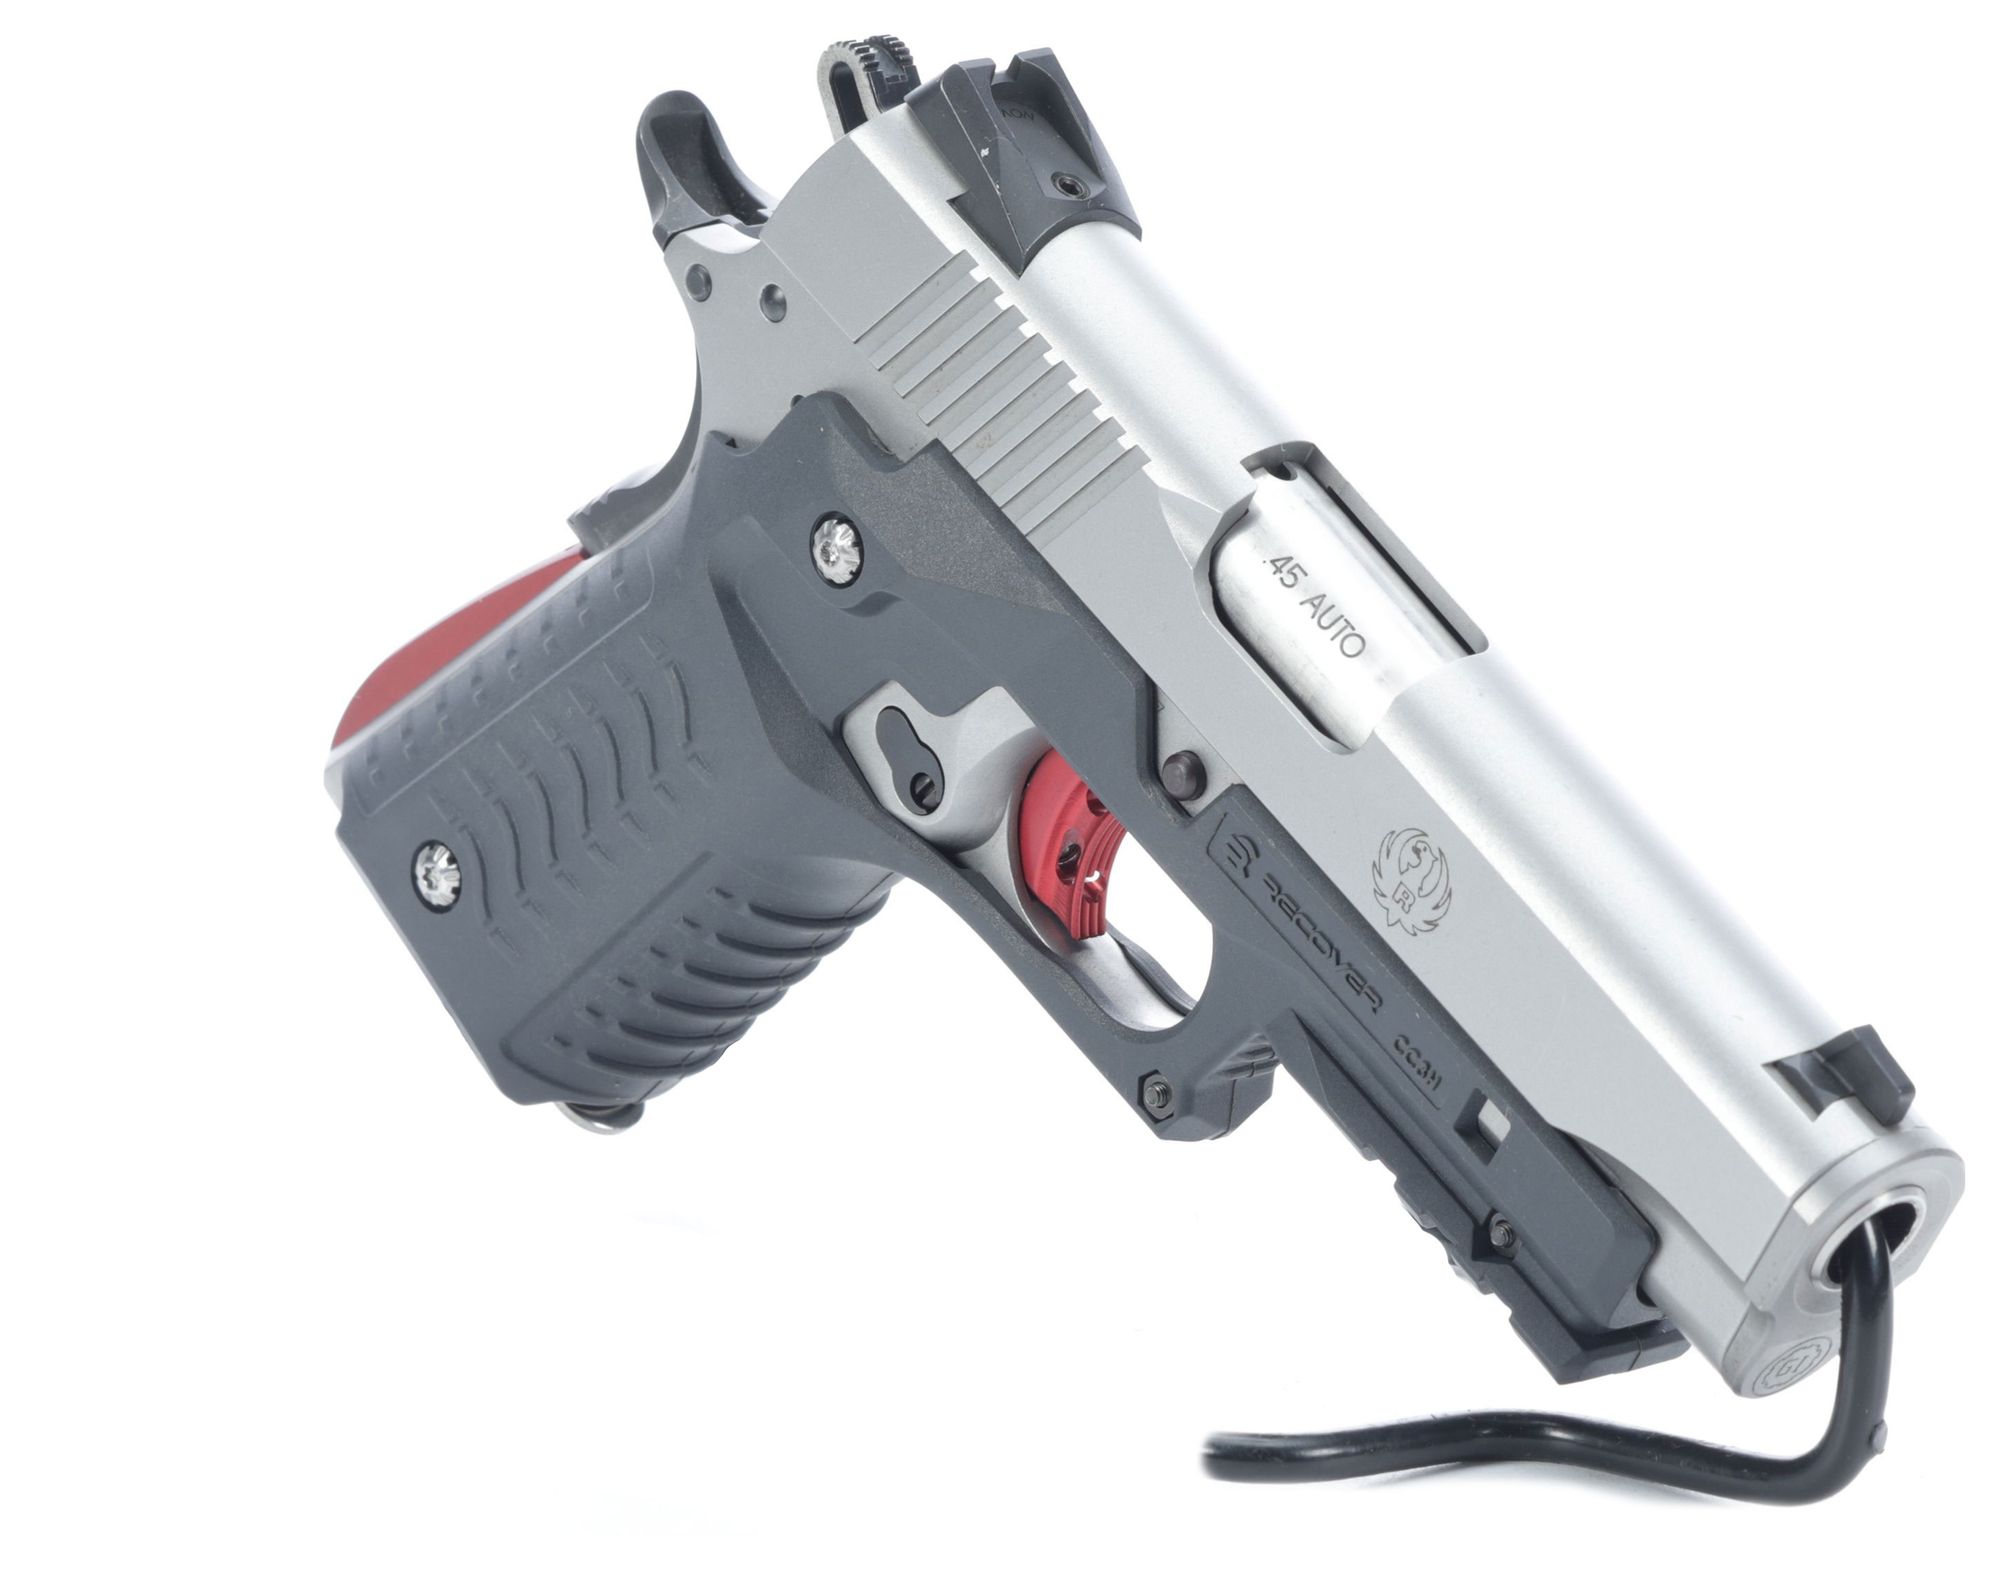 Ruger Model SR1911 Pistol outfitted with Guncrafter brand bushing sold during RIAC's July Online Auction